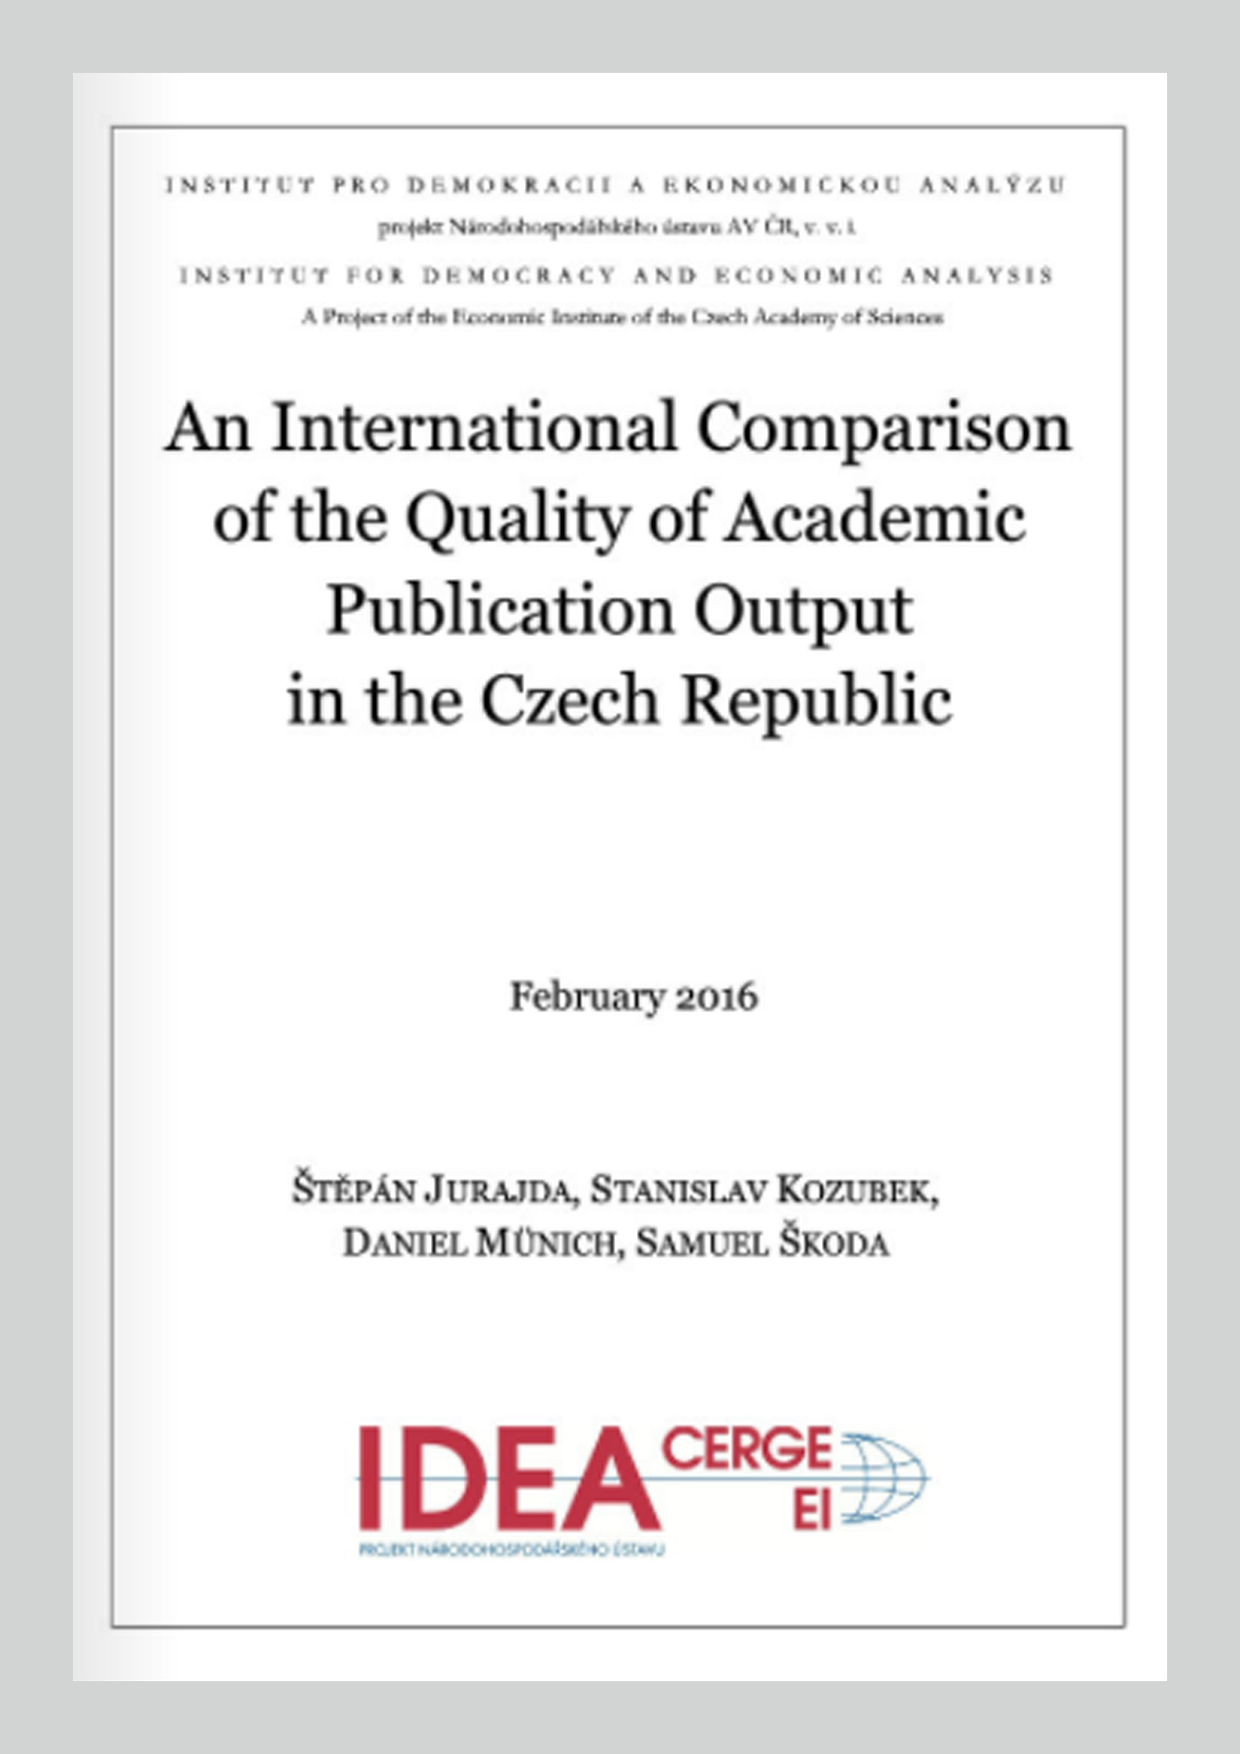 An International Comparison of the Quality of Academic Publication Output in the Czech Republic